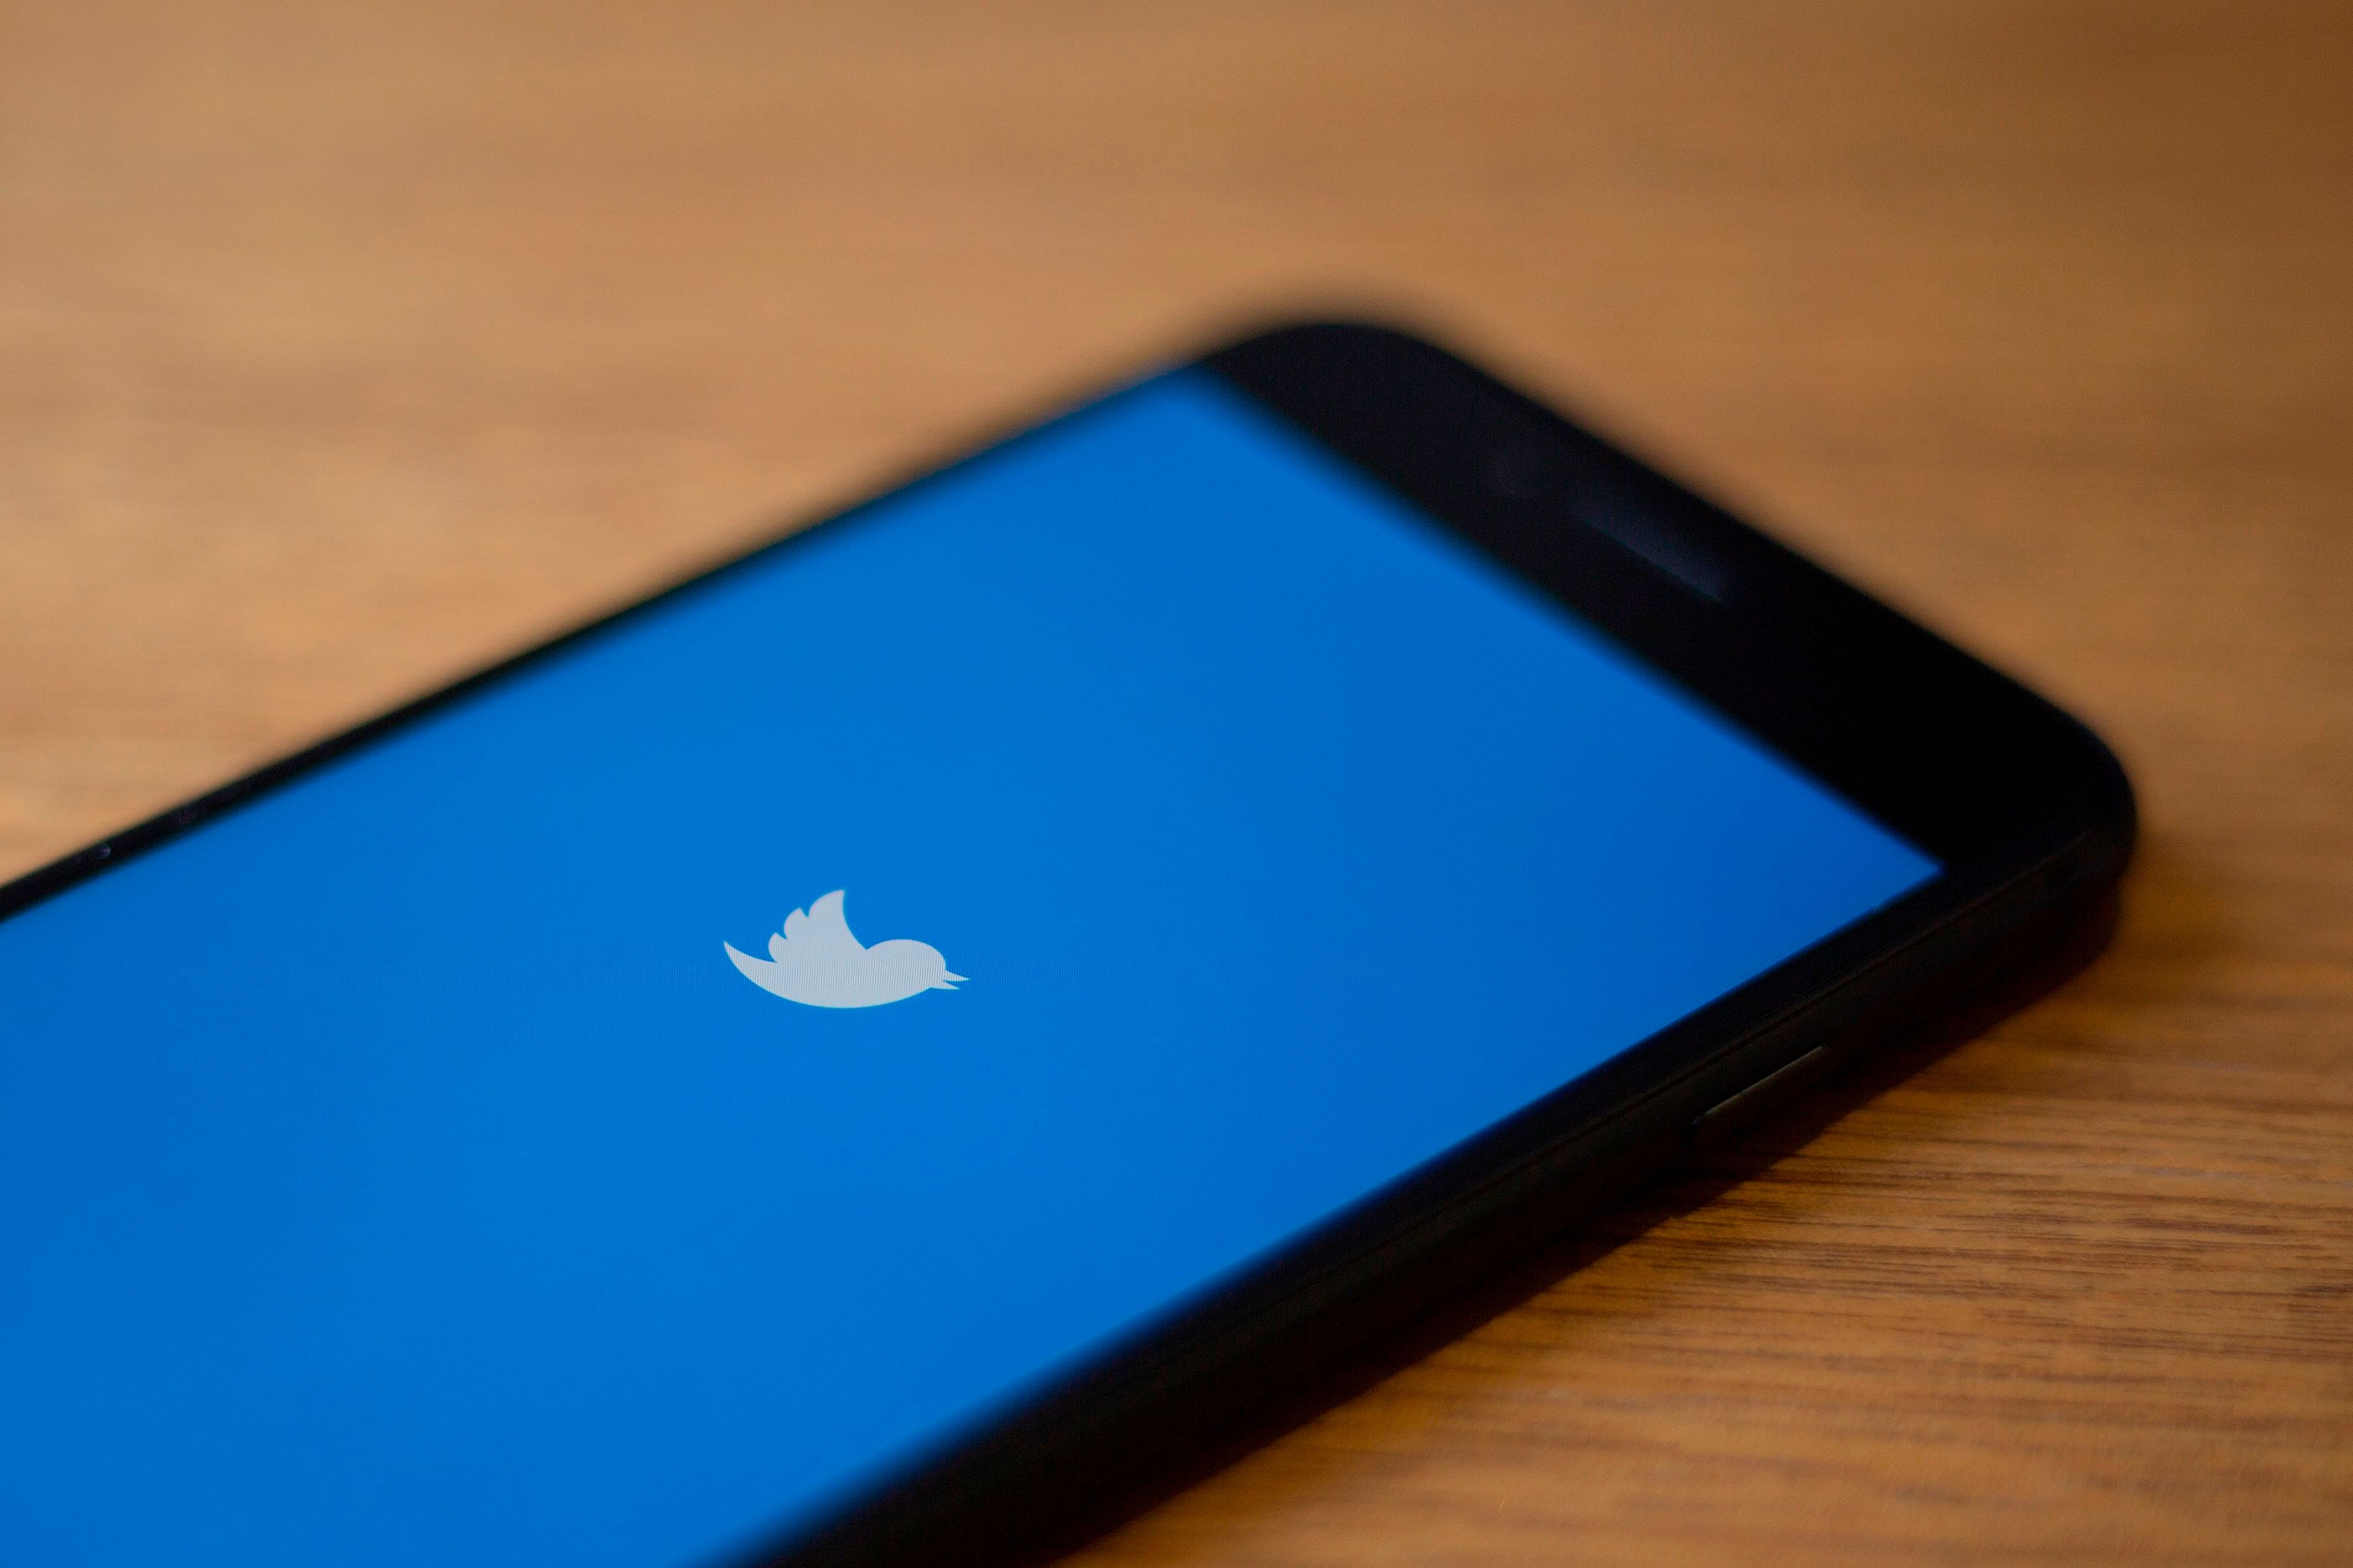 Twitter has been in a tussle with the central government after the new IT rules came into effect. Credit: AFP Photo